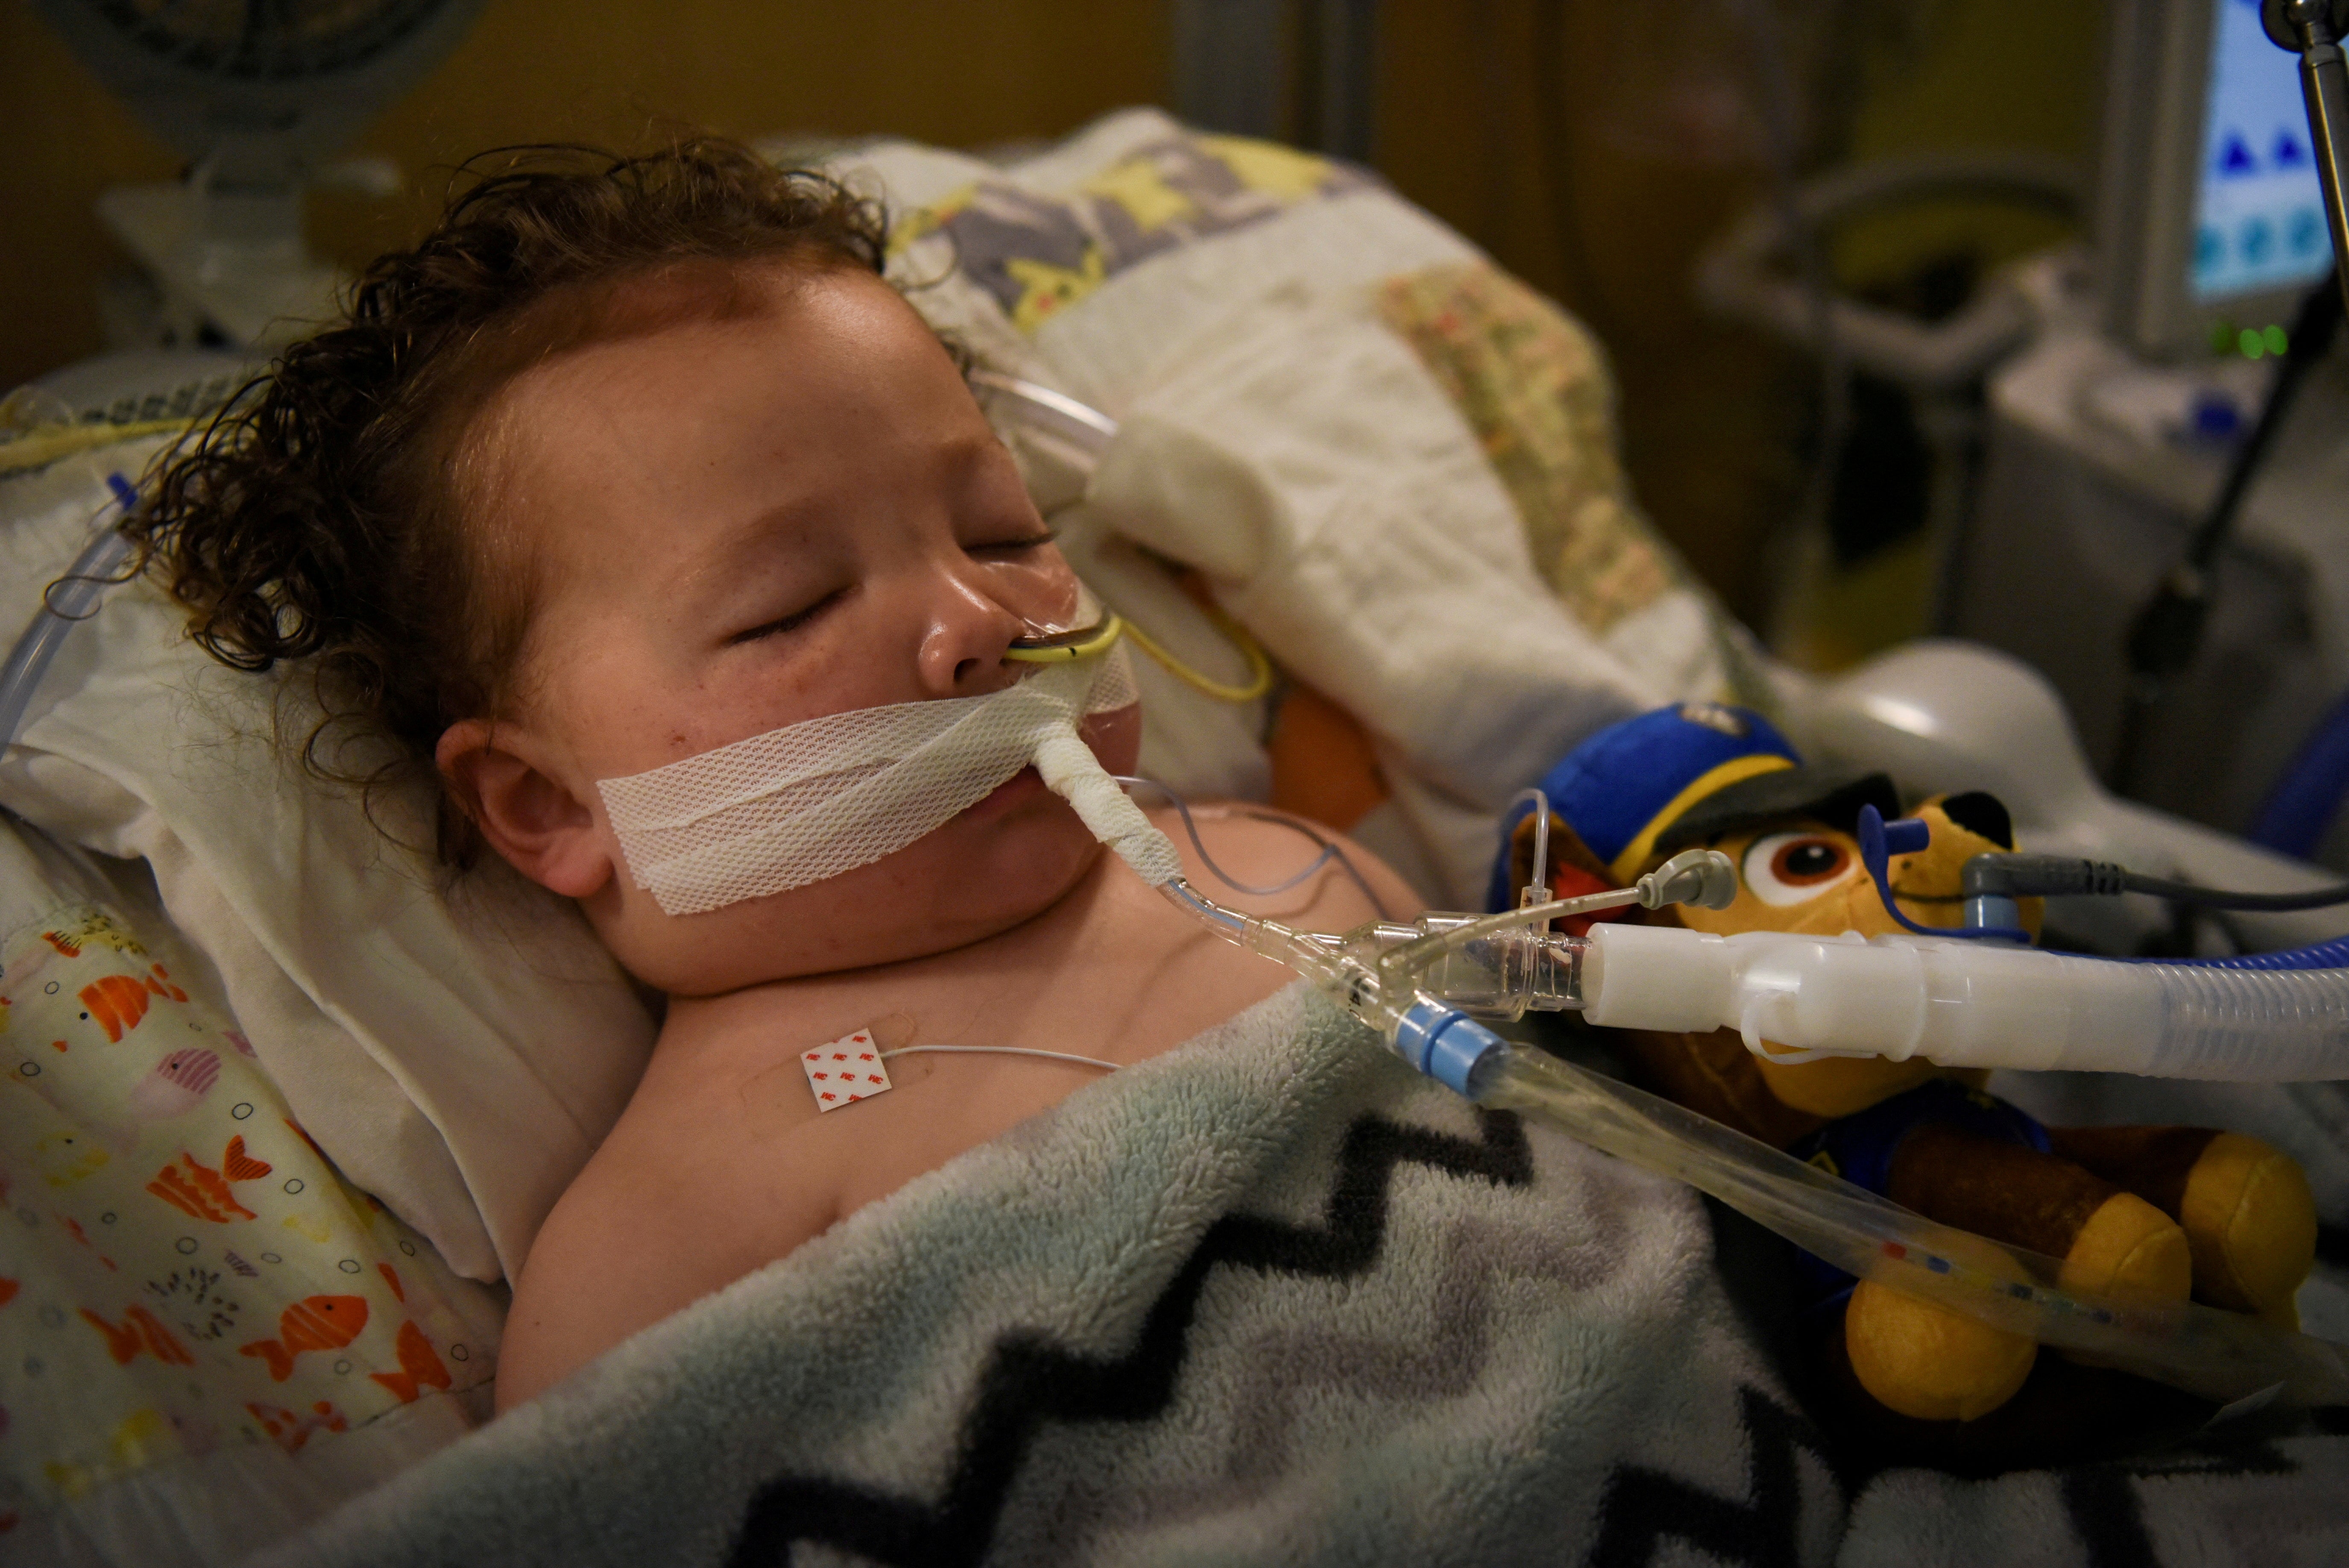 Adrian James, then 2 years old, breathed with the help of a ventilator at SSM Health Cardinal Glennon Children’s Hospital on 5 October, 2021